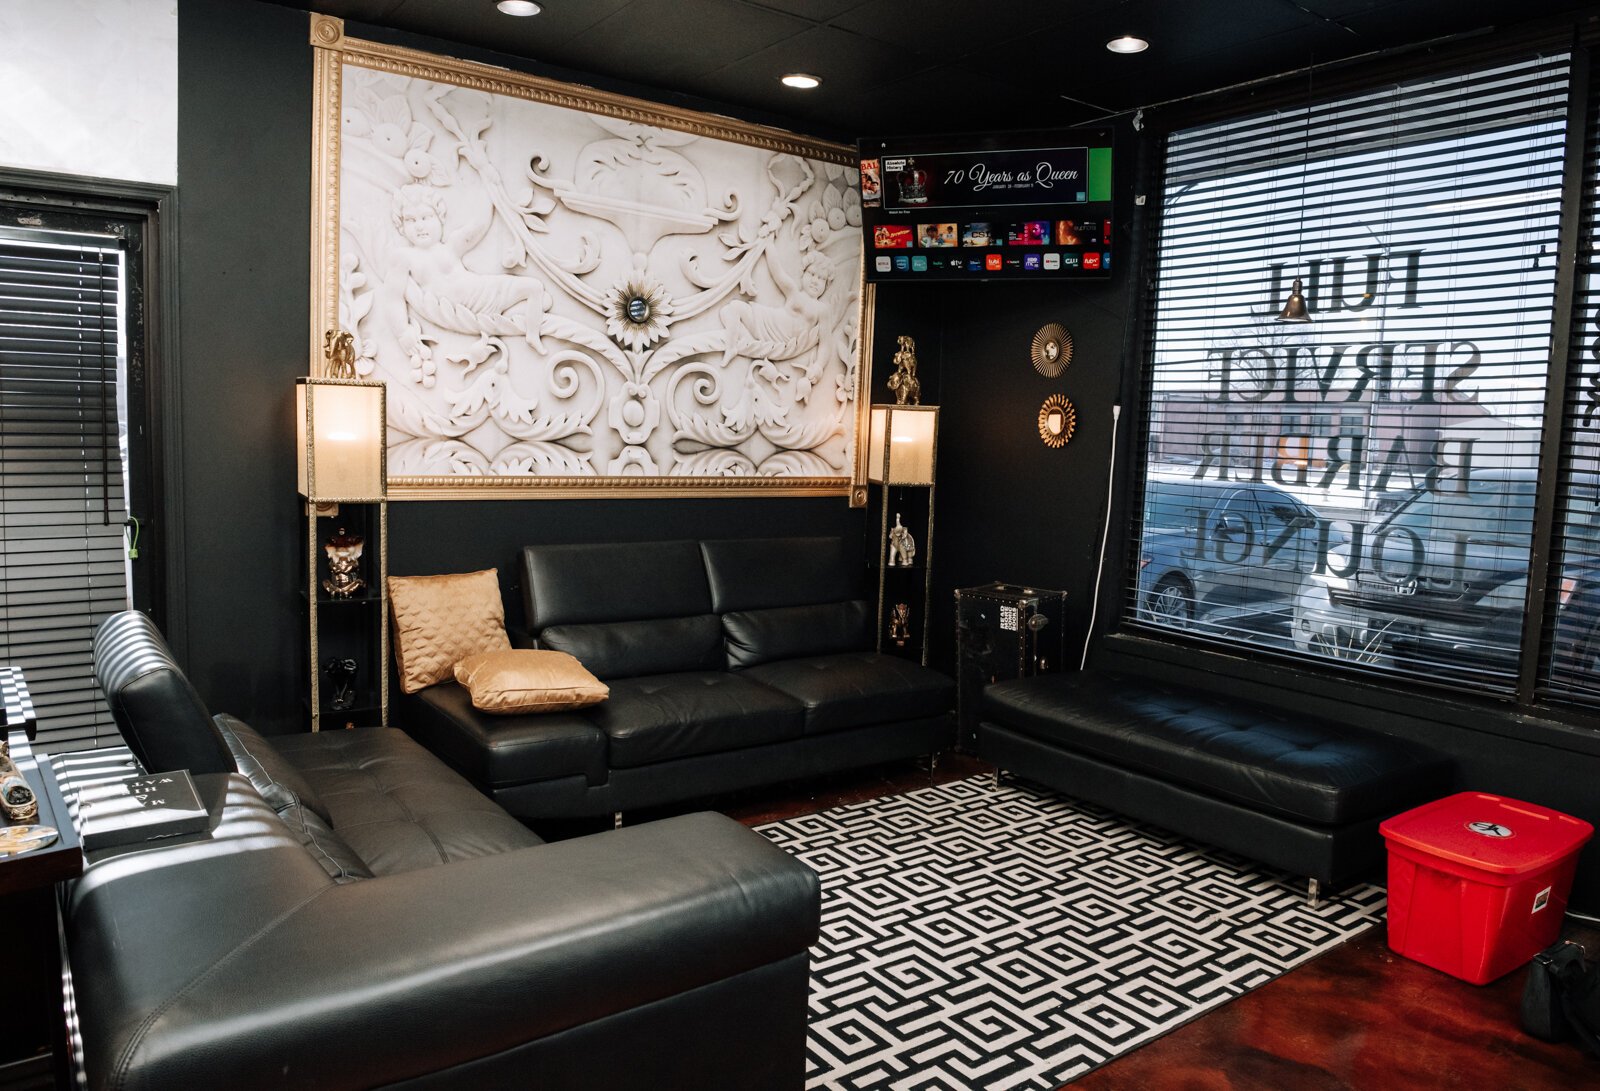 The lounge area at Legendary Barber Lounge.